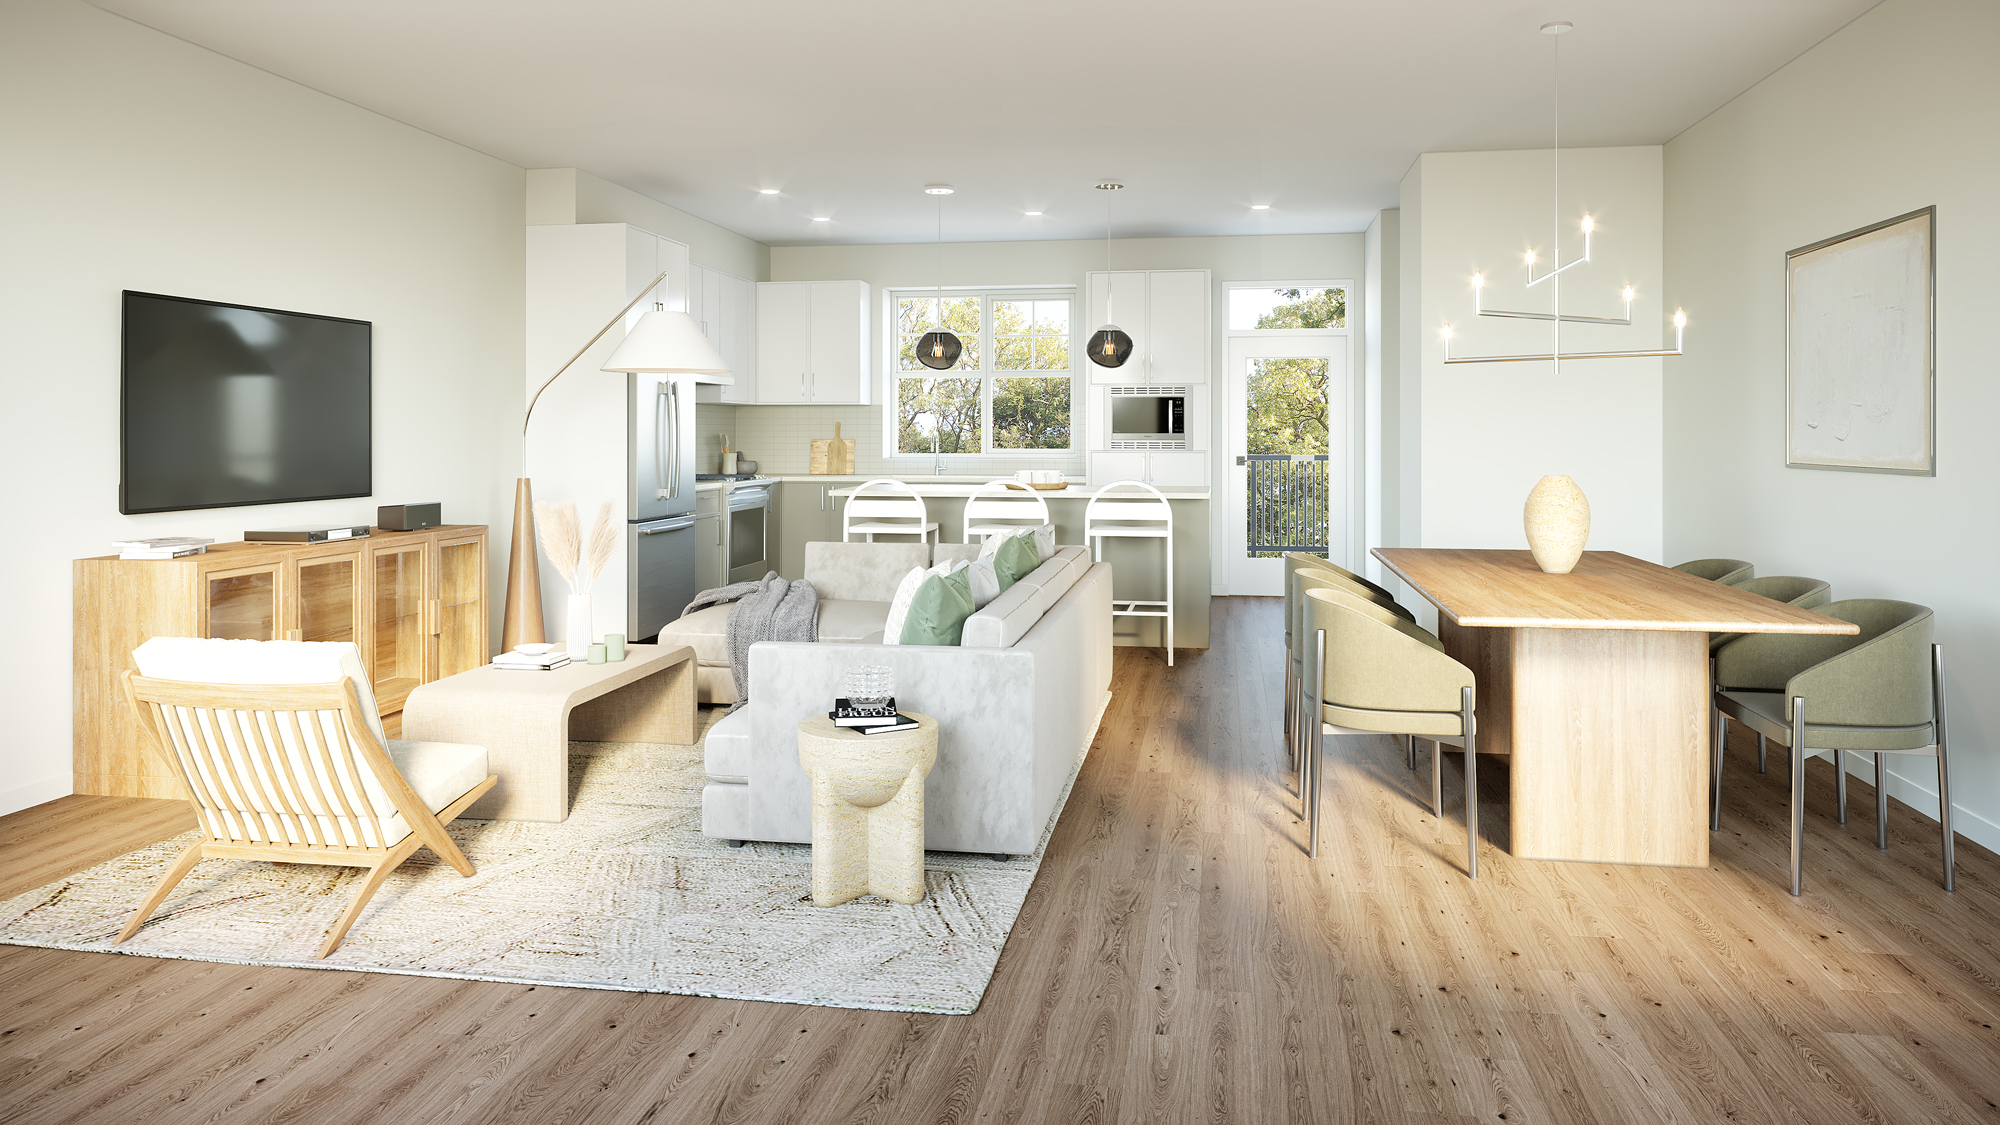 Kinship Living kitchen and living space, Unit C